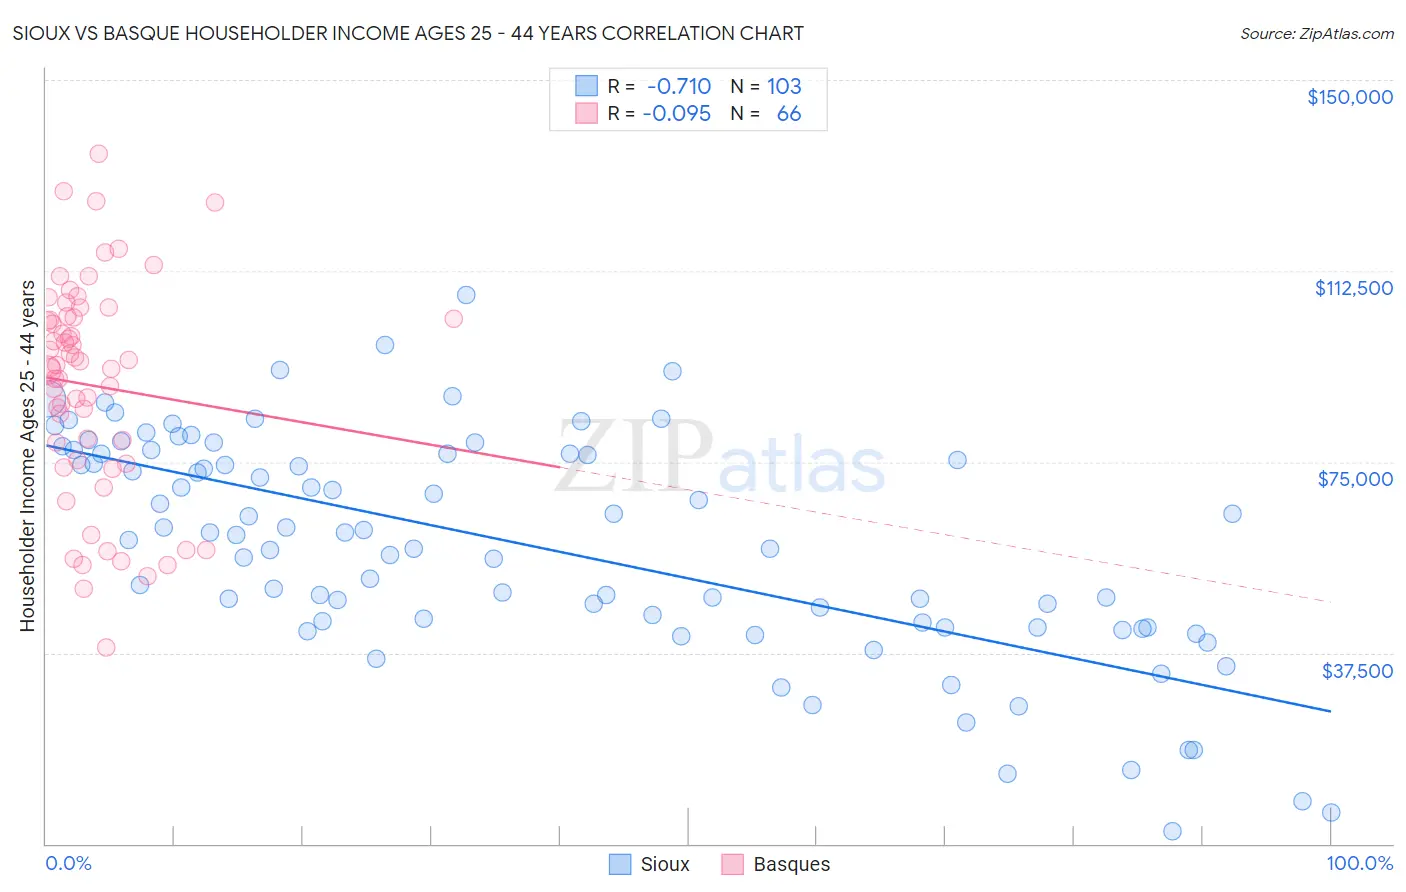 Sioux vs Basque Householder Income Ages 25 - 44 years